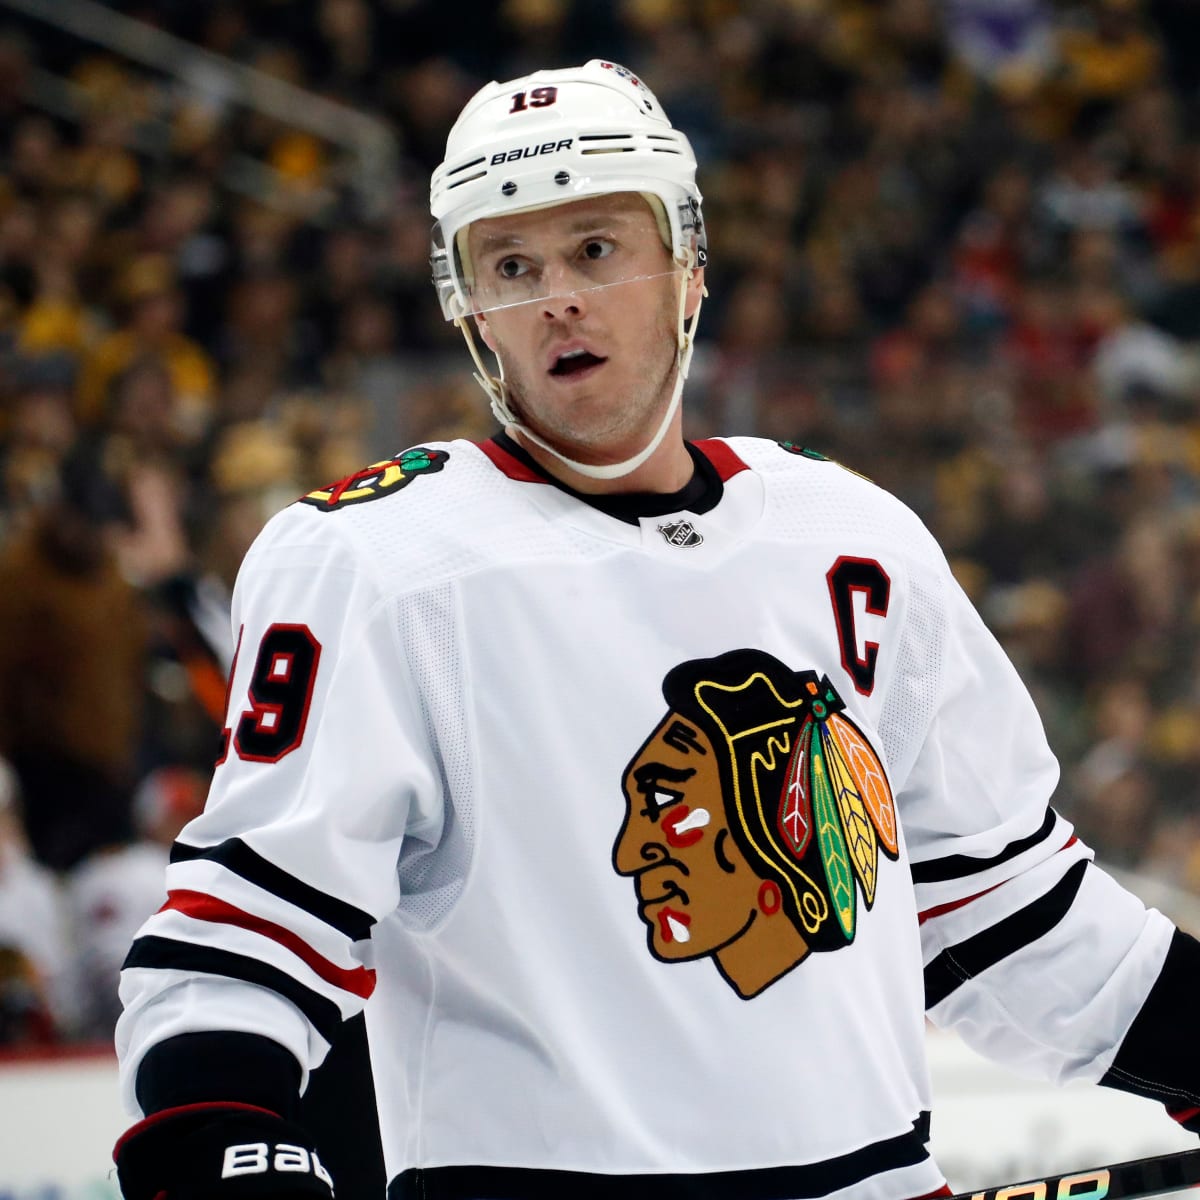 Confirmed: Tonight Will Be Jonathan Toews Last Game with the